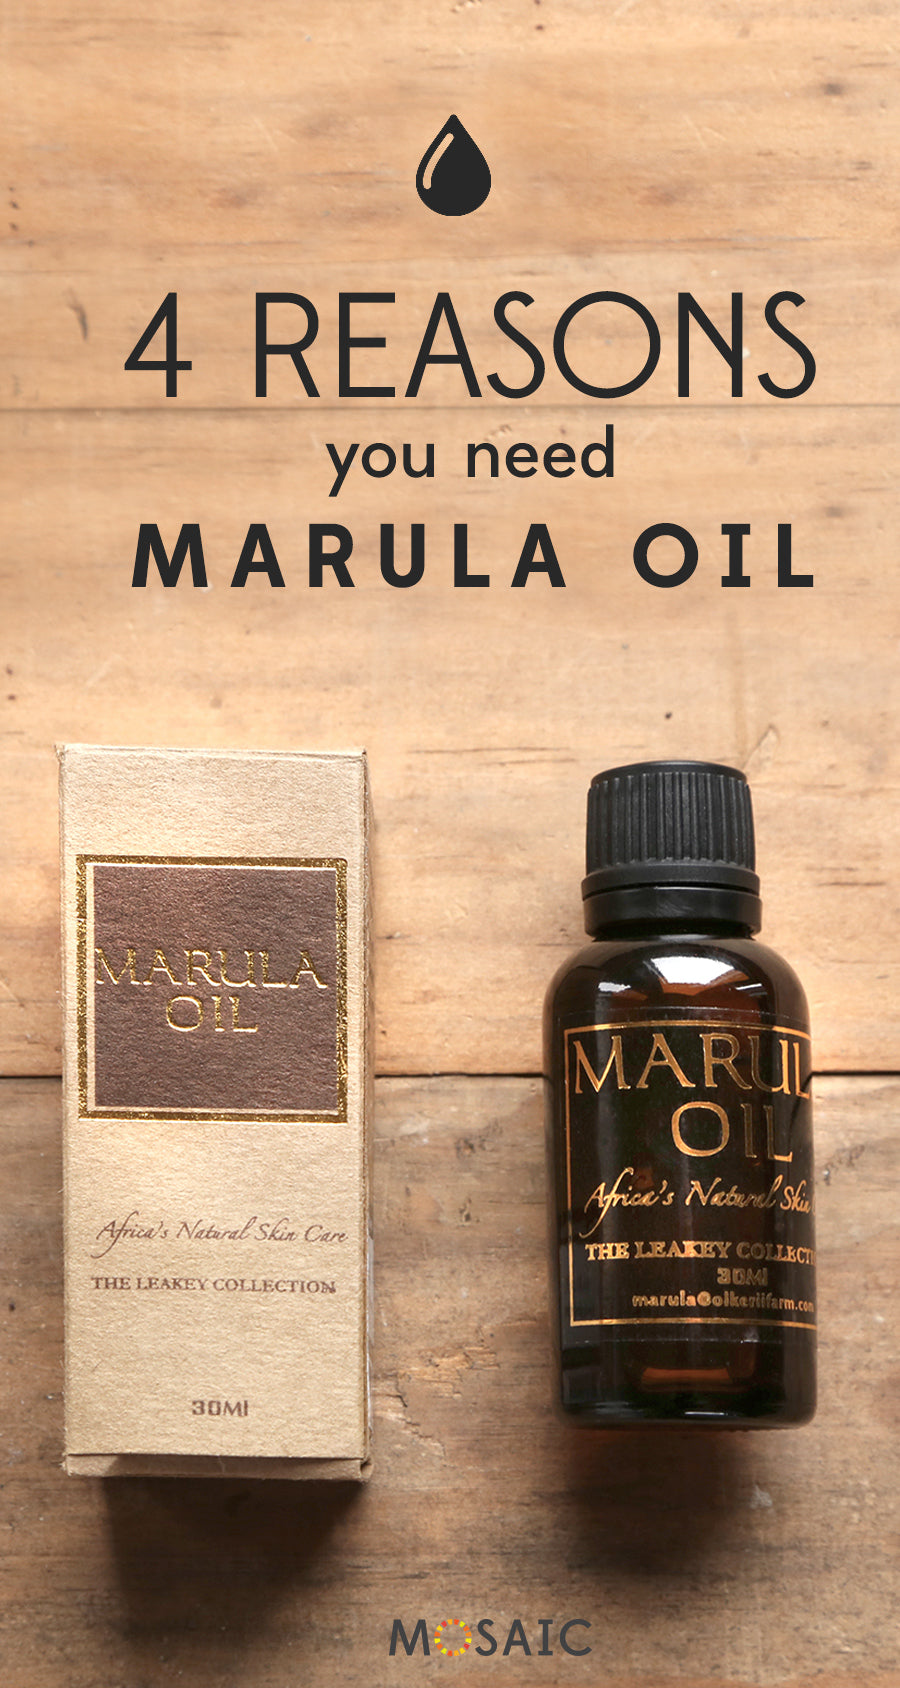 Marula Oil: The African Skin Care Secret That You Need to Add to Your Routine. 100% Pure, Natural & Fair Trade